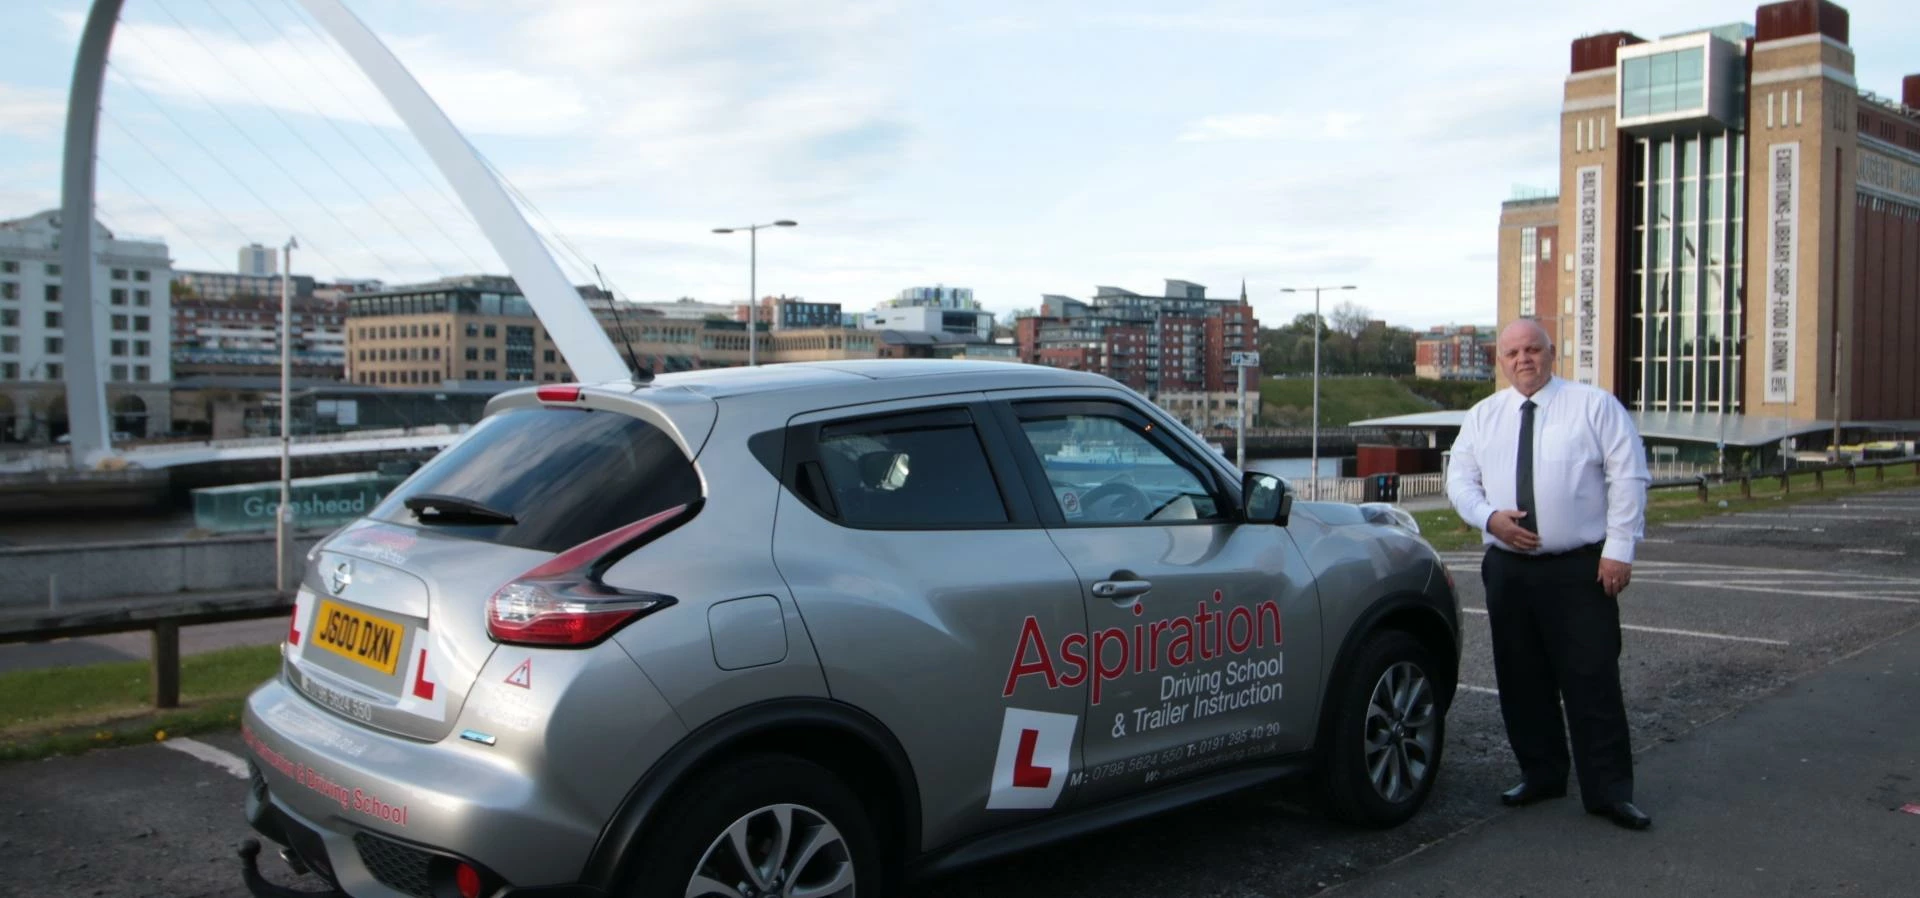 John Dixon is looking to recruit driving instructors in the north east